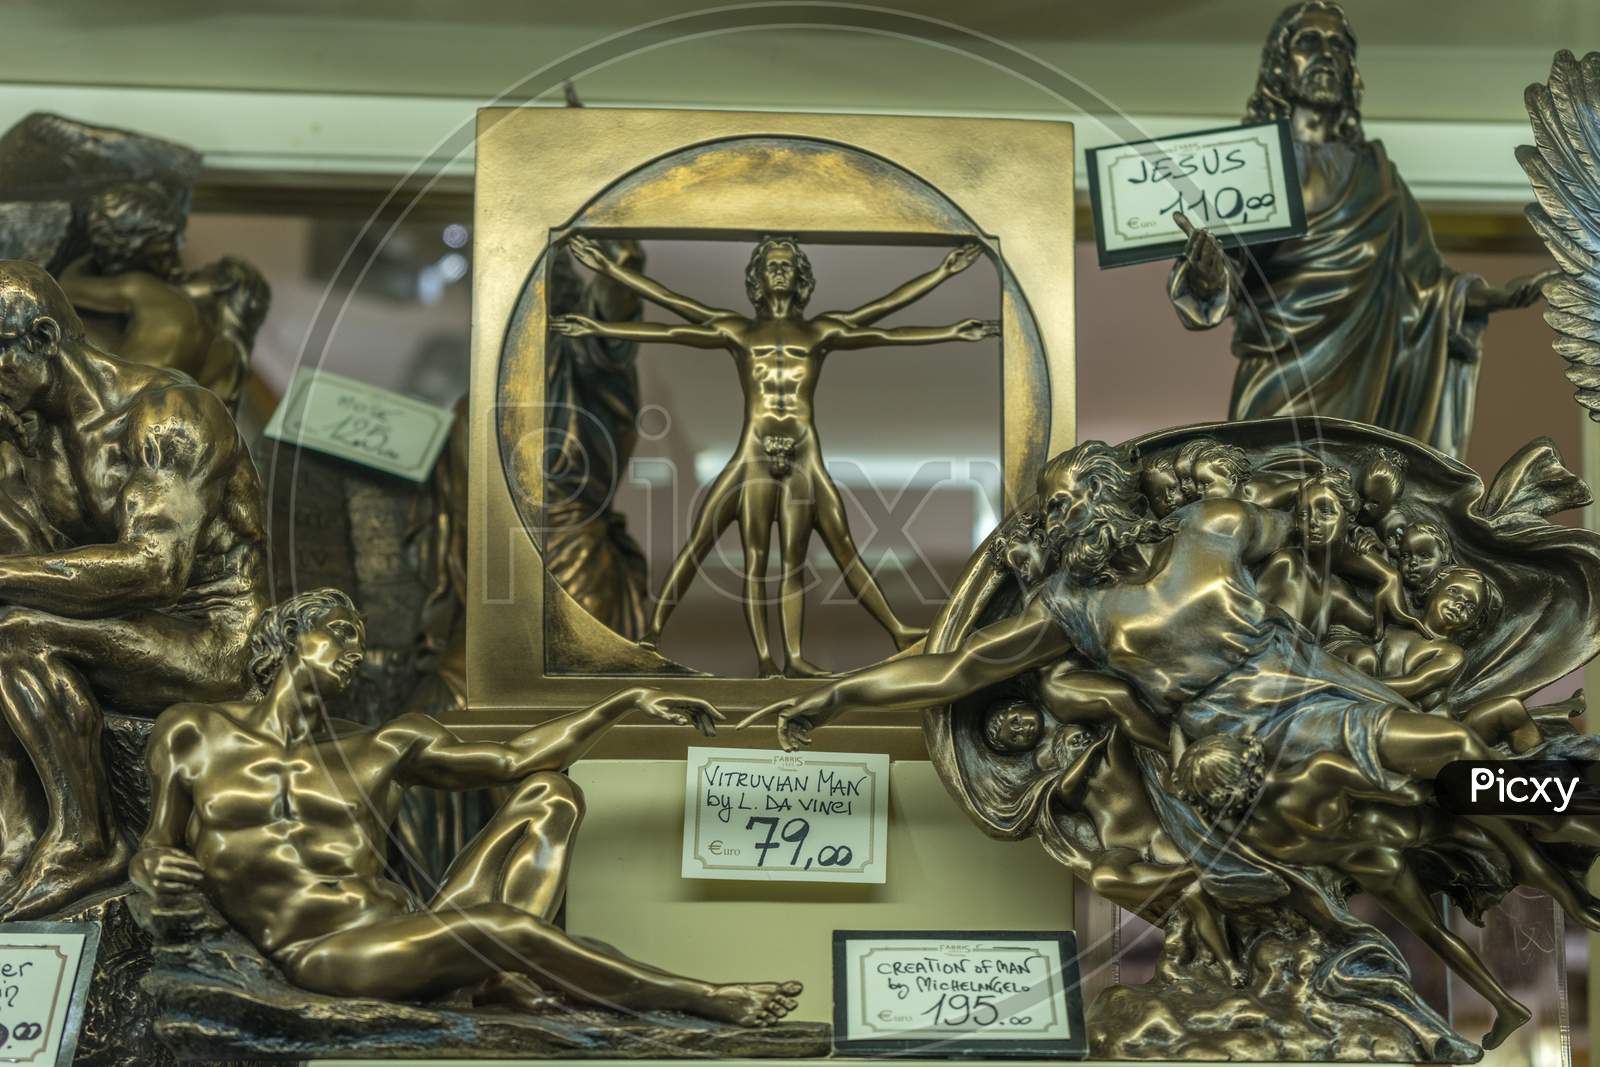 Venice, Italy - 30 June 2018: Vitruvian Man Artifacts On Display In A Shop In Venice, Italy